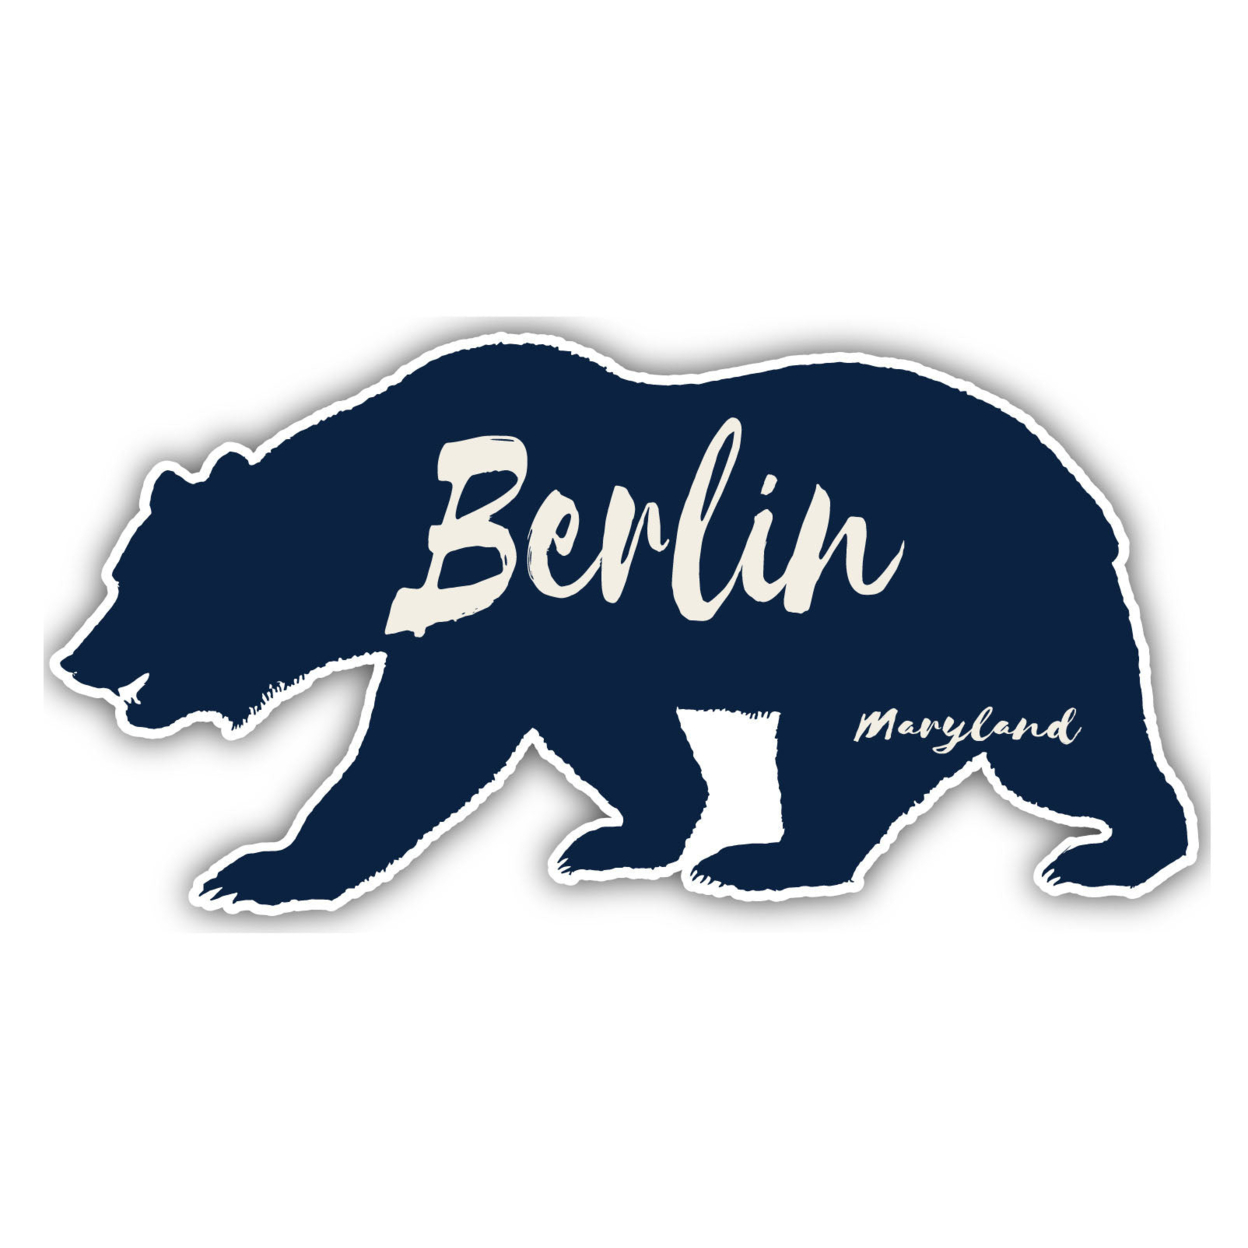 Berlin Maryland Souvenir Decorative Stickers (Choose Theme And Size) - 4-Pack, 8-Inch, Bear